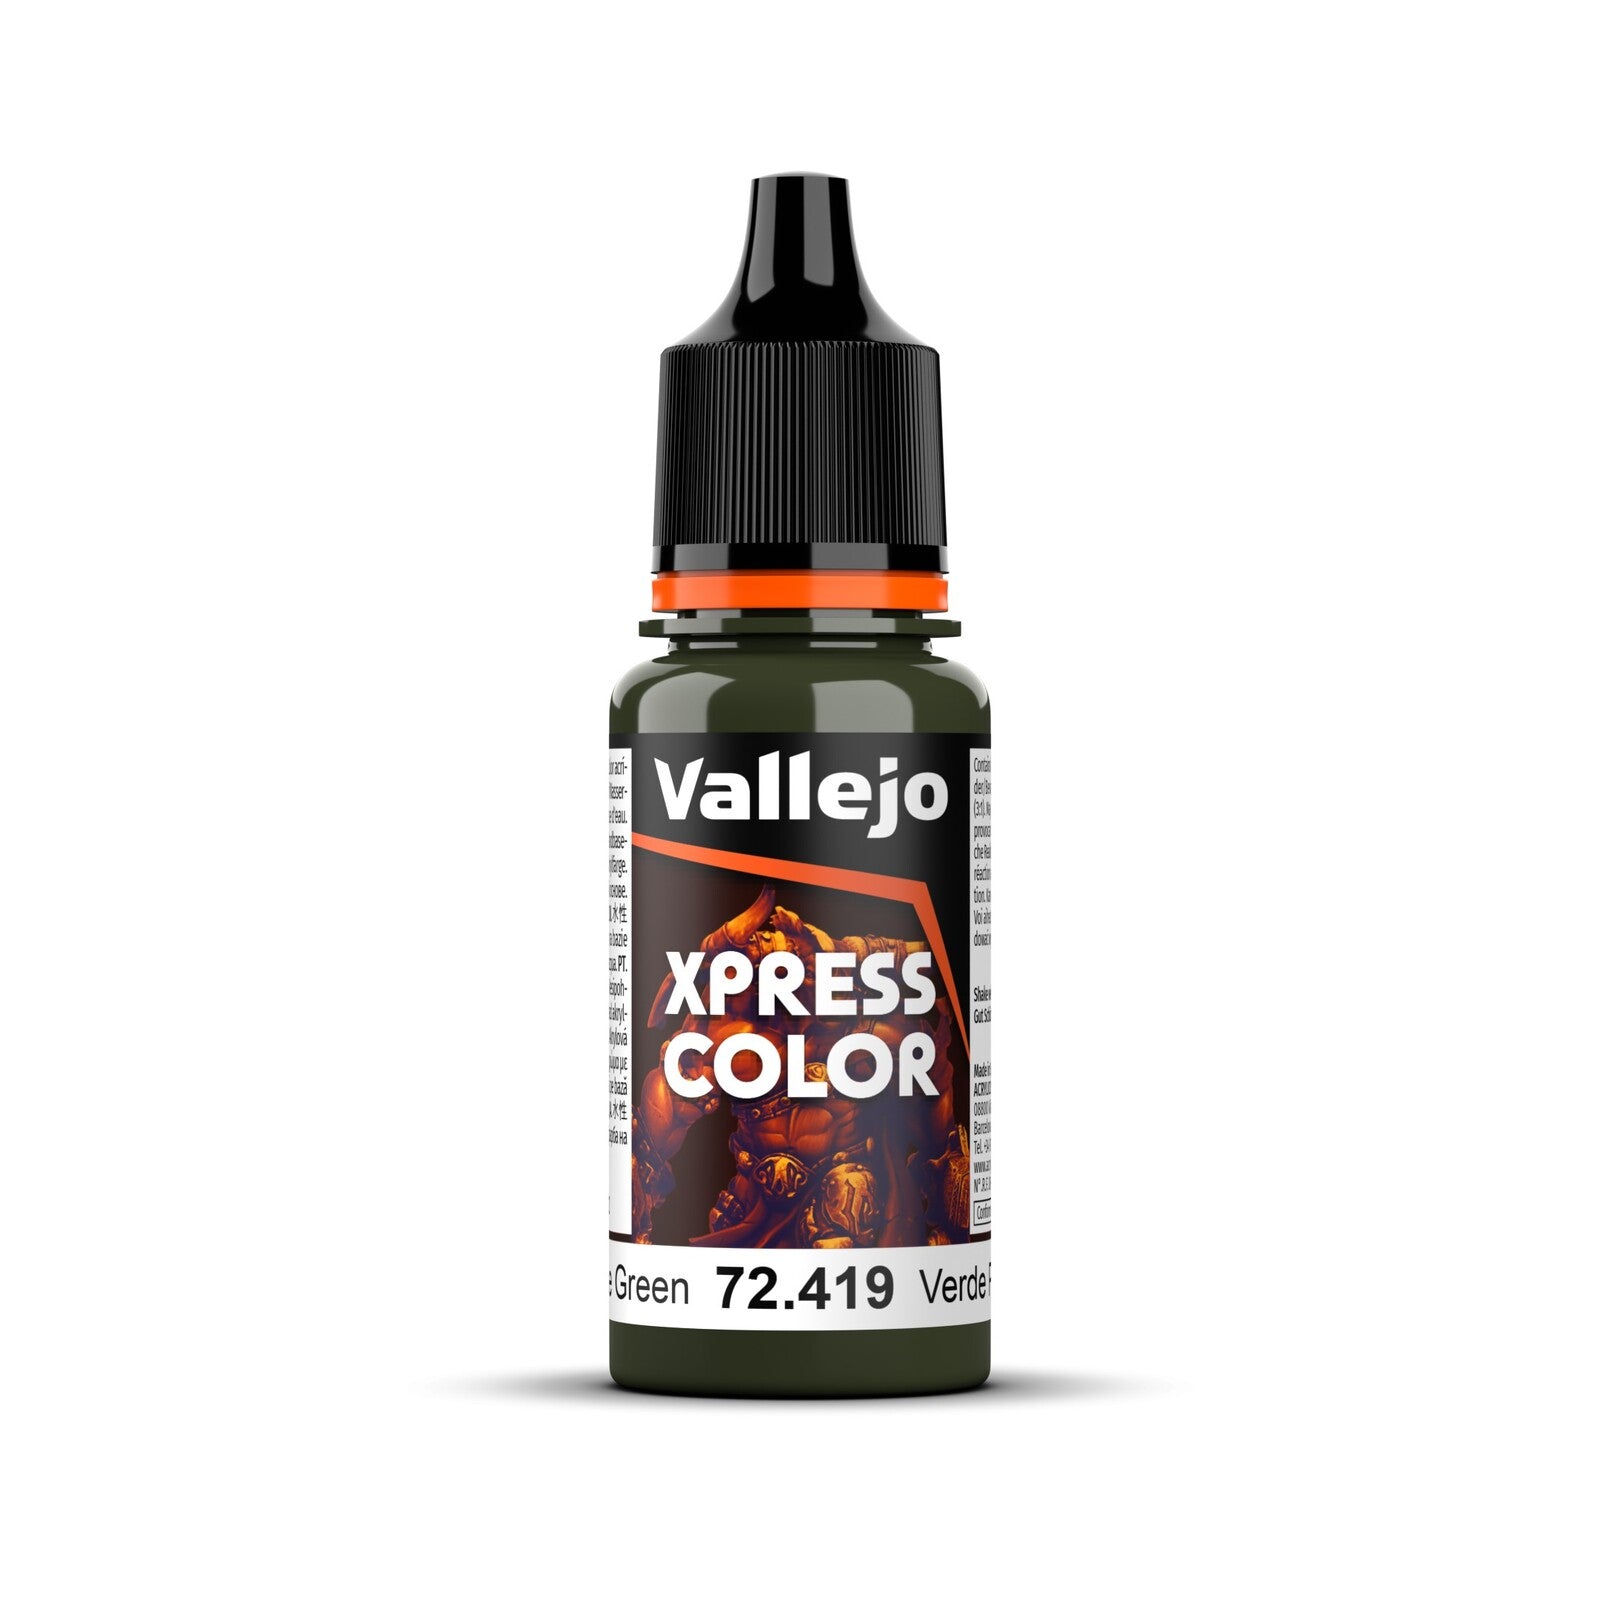 Vallejo Game Colour Xpress Color Plague Green 18ml Acrylic Paint - New Formulation